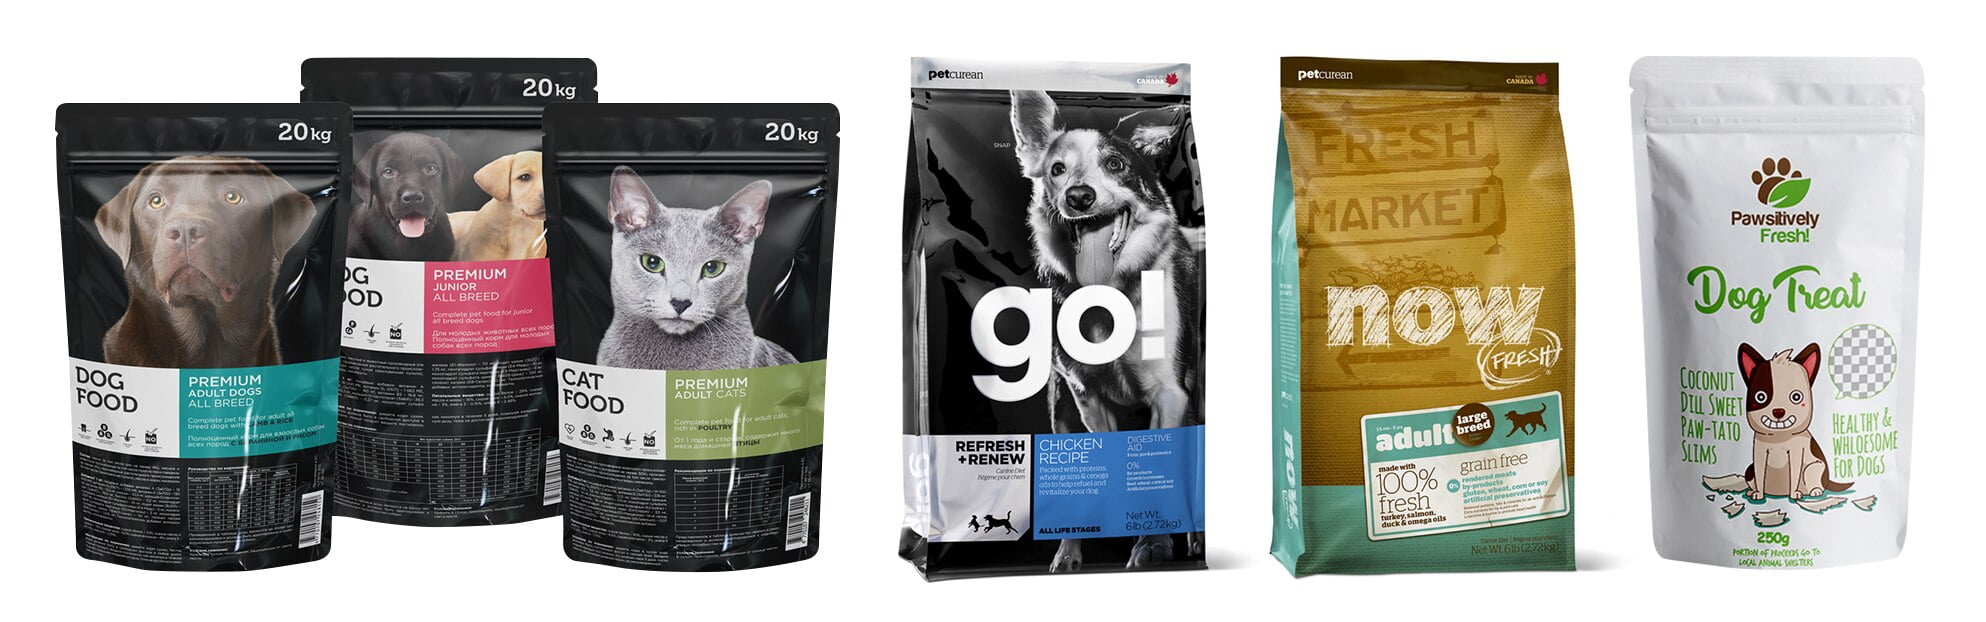 gloss-black-pet-food-stand-up-bags-box-bottom-dog-treats-packaging-bags-cat-food-stand-up-pouches.jpg